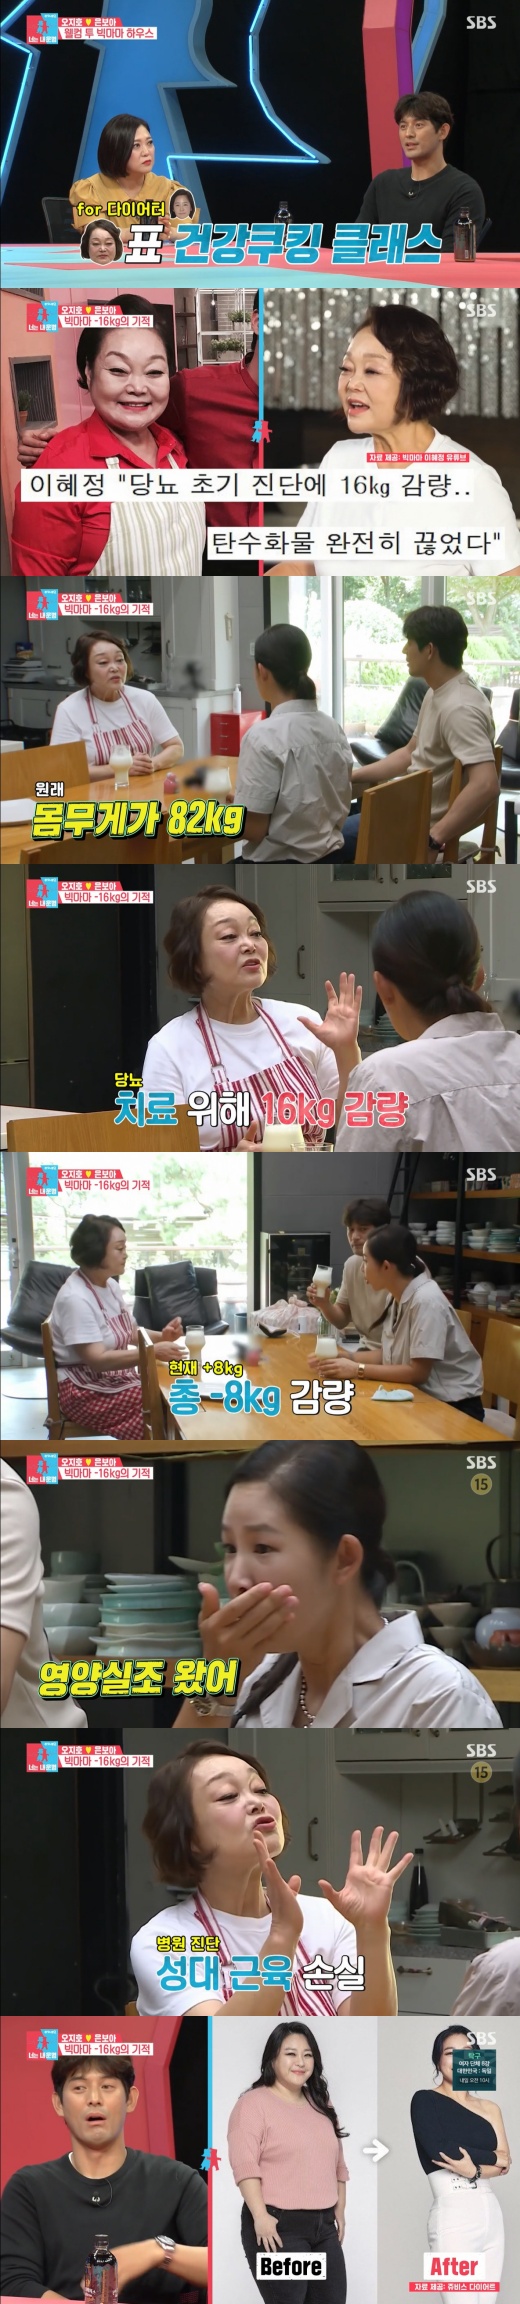 Cooking researcher Lee Hye-jung looked back at the hard process after the harsh Diet.On the 2nd SBS Same Bed, Different Dreams 2 Season 2 - You Are My Destiny, Oh Ji-ho - silver BOA couple who visited Lee Hye-jungs Diet Cooking Class was portrayed.Lee Hye-jung made melon juice with a welcome drink; the silver BOA admired it as teacher is very slim and Lee Hye-jung replied, I took it out to live.Lee Hye-jung, who lost 16kg while suffering from diabetes, said: It was originally 82kg.I lost a total of 16kg, but it is 8kg again.  Why did you try to get back on the flesh, it was malnutrition, he said.I heard a hoarse sound in my neck and I could not speak. I went to the otolaryngology clinic and said that my muscles were lost, he said.I did not speak because I did not have the power. Oh Ji-ho and the silver BOA said, This looks just fine, its so pretty.Lee Hye-jung said, I will have a face in autumn Chuseok. I have not been able to get Botox yet, but I want to try it.I have such a desire, so I will get a quote. Lee Young-hyun, who watched it in the studio, also said, I lost 33kg for 5 months. I started Diet because of gestational diabetes.Oh Ji-ho also nodded, saying, My wife came with gestational diabetes and had an injection.Meanwhile, Lee Hye-jung said Oh Ji-ho - recommends health food to the BOA couple and still gives her husband a pot.I asked my husband a while ago, Where is my wife who has been cooking for over 40 years? But she said she wanted to live with a pretty person even if her husband could not eat.I was dazed at the moment, he confessed, embarrassing the couple.Studio MCs who watched this were also surprised and said, Mr. Lee Hye-jung does a lot of husbands diss. Its a joke.